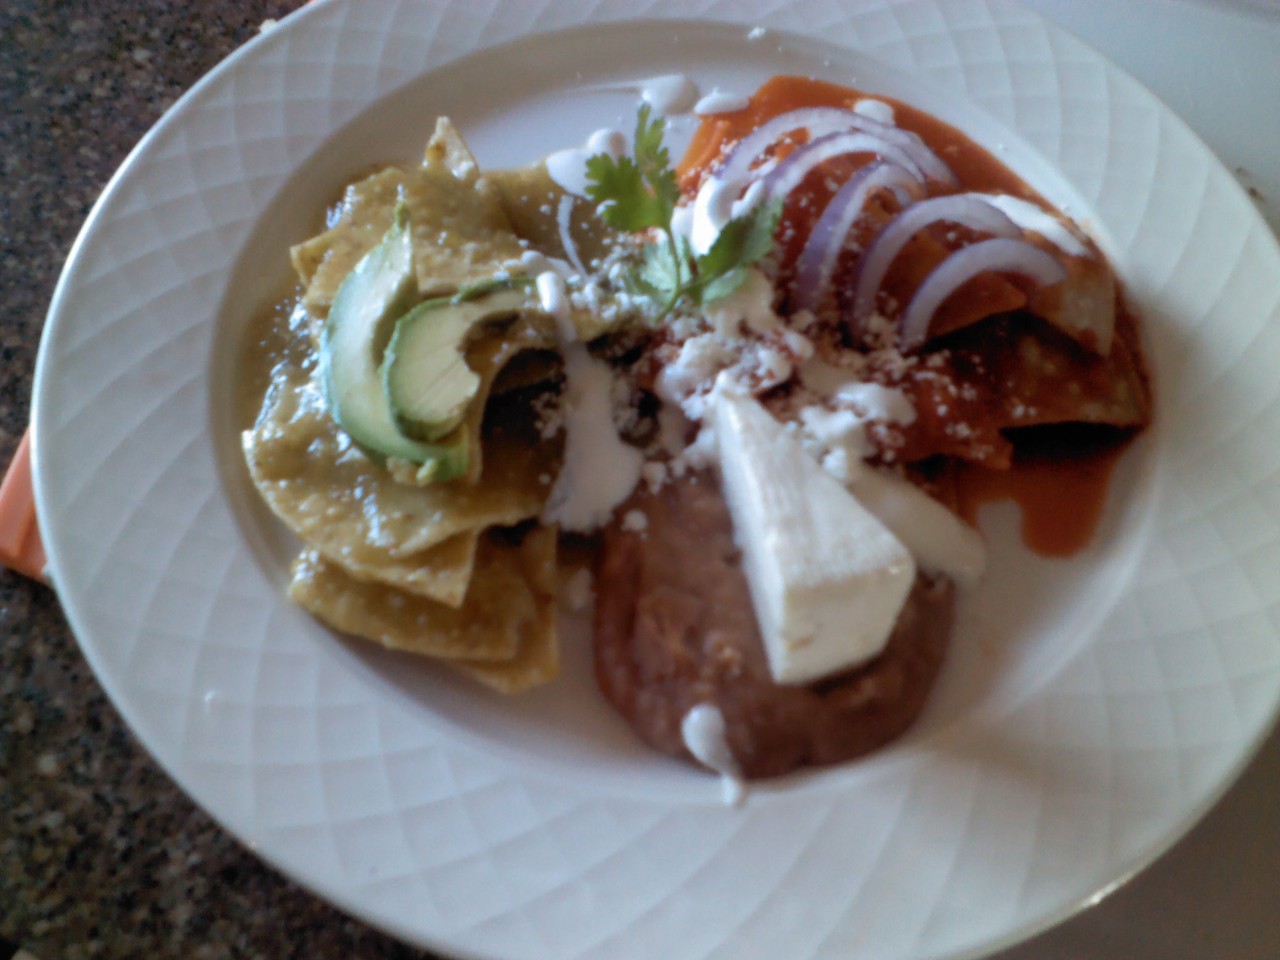  Try our delicious Mexican Chilaquiles